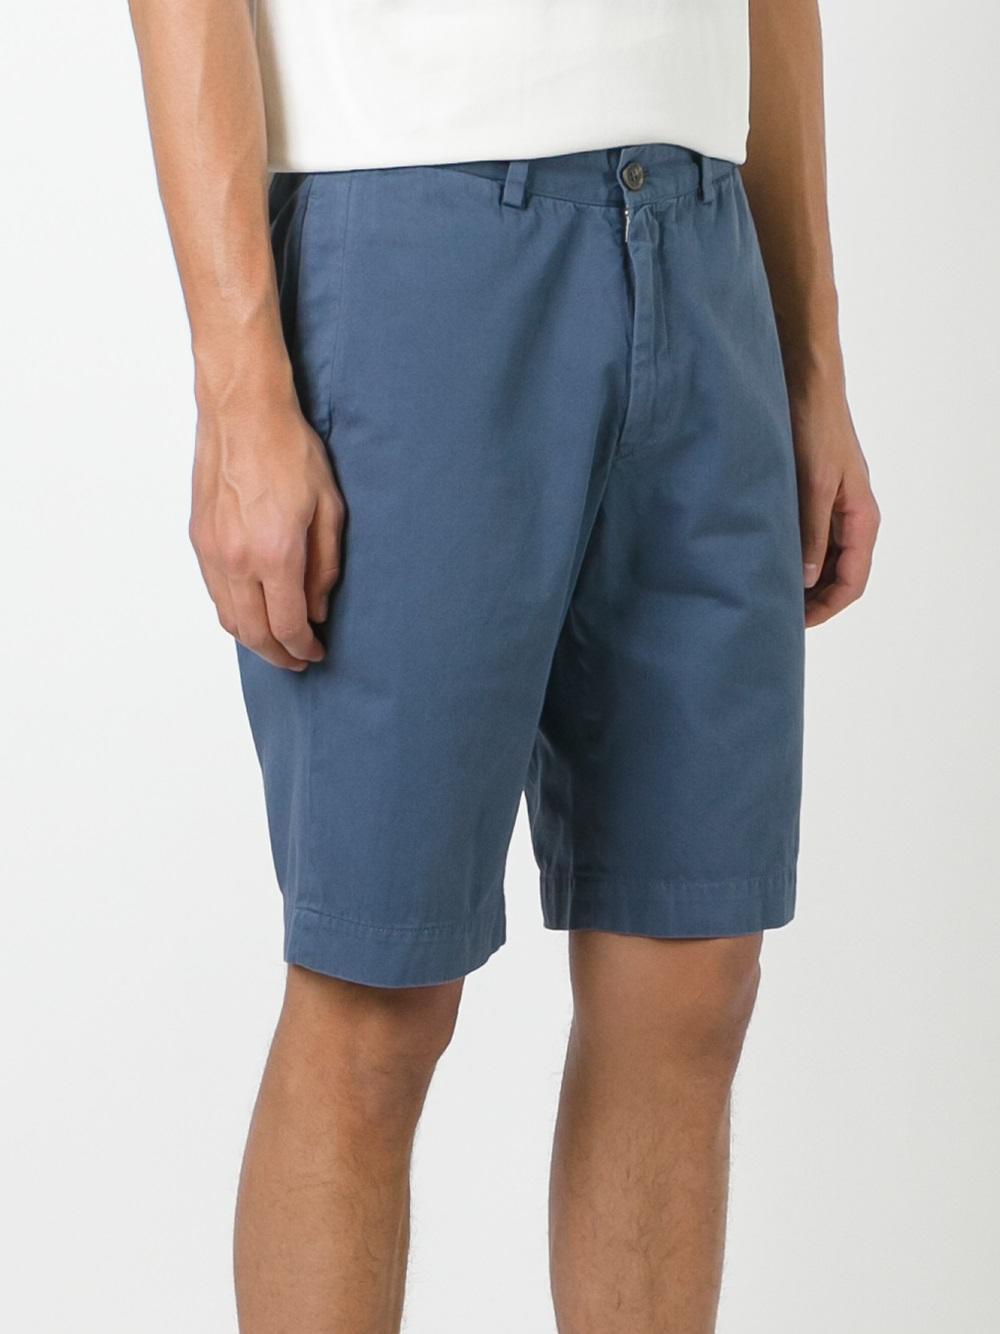 Lyst - Sunspel Classic Chino Shorts in Blue for Men